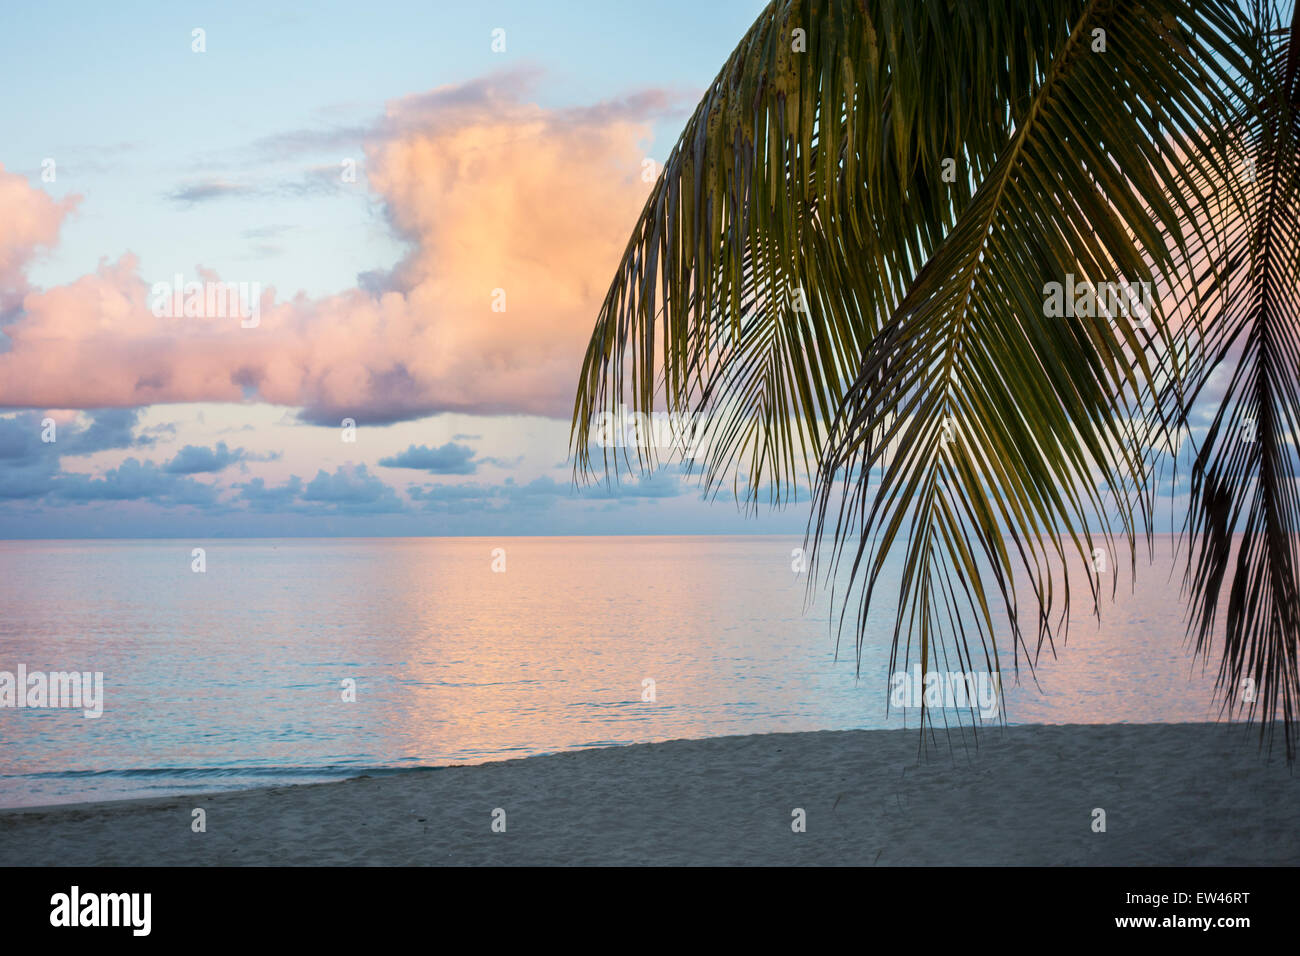 A view from a tropical island showing palm fronds, the beach and pink dawn clouds reflecting on the Caribbean sea. St. Croix, U.S. Virgin Islands. Stock Photo